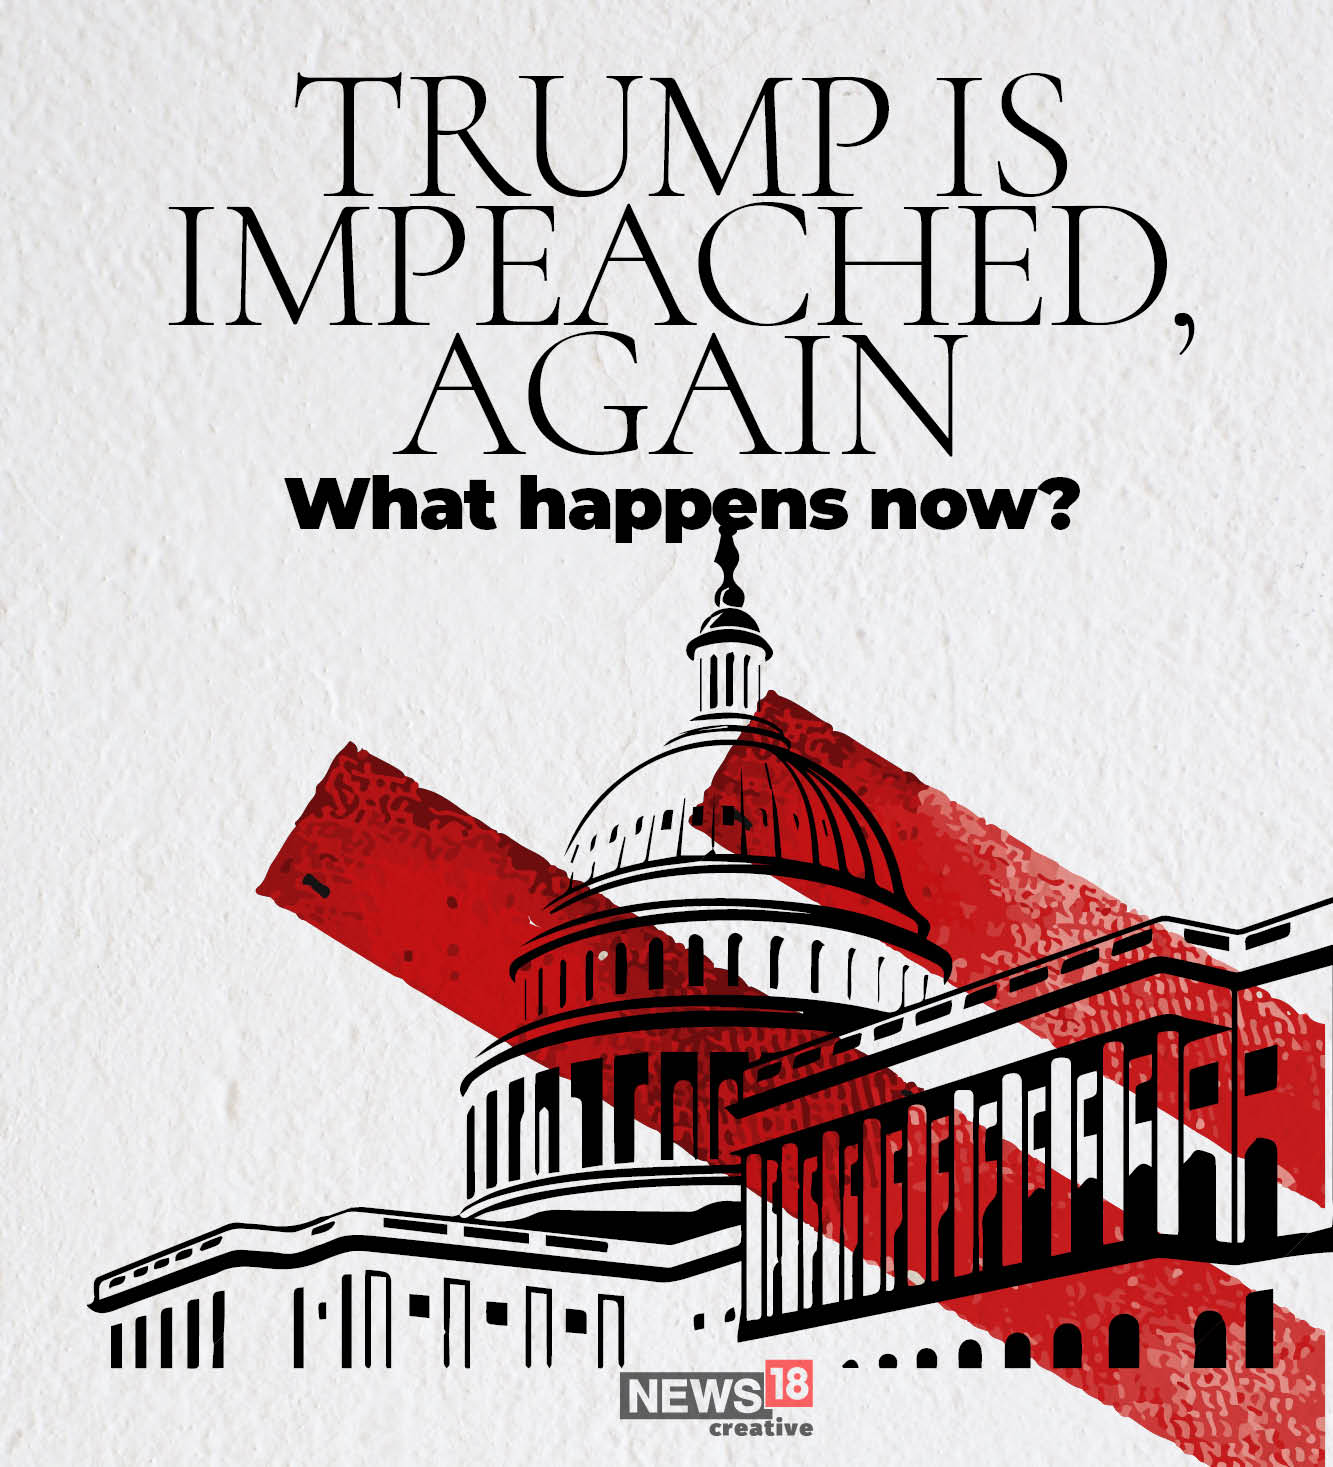 Donald Trump is impeached, again. What now?